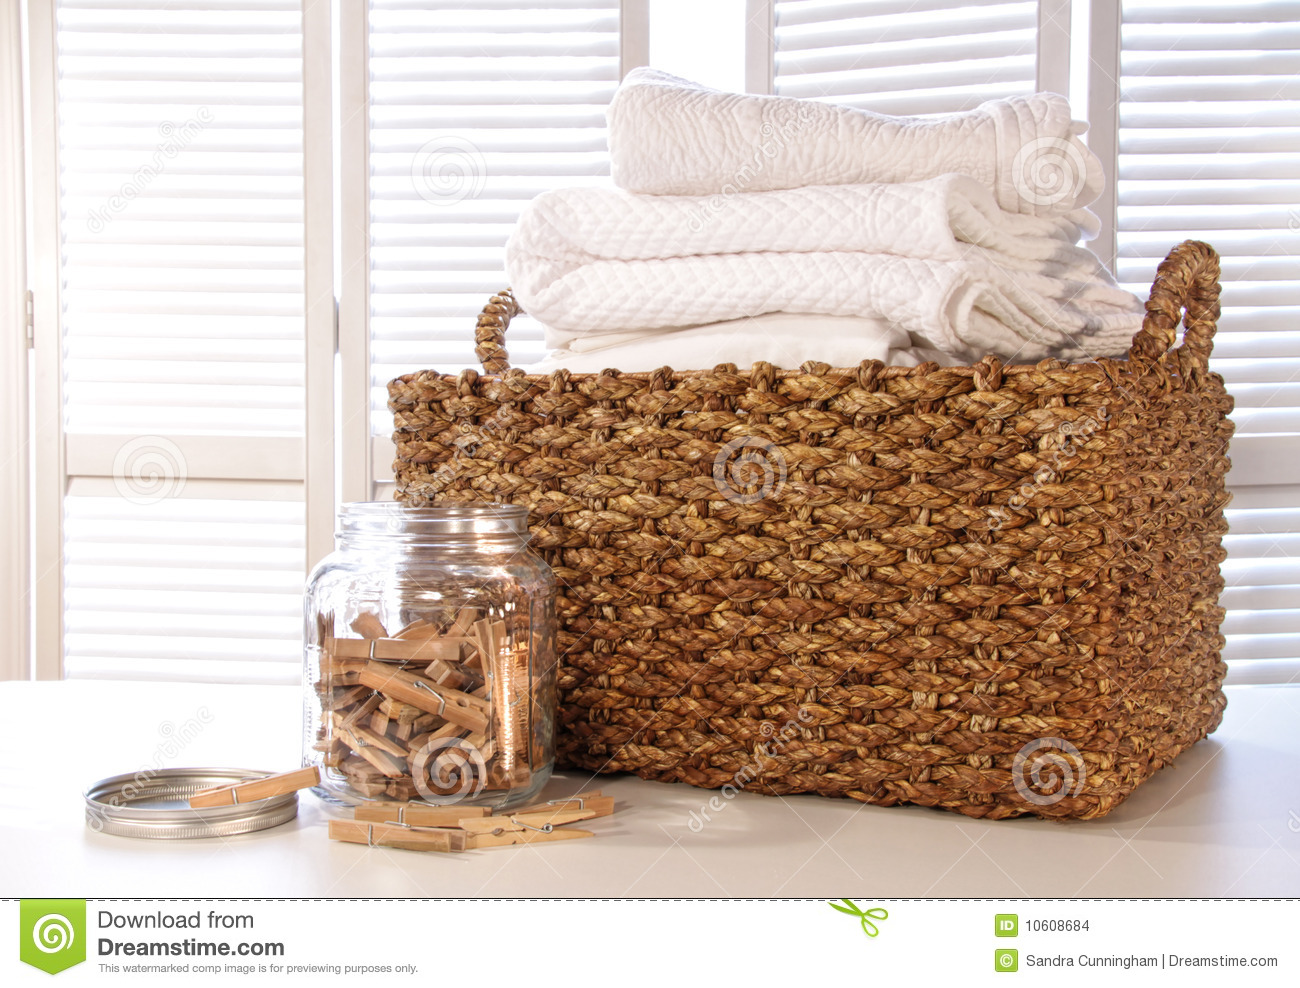 Laundry Basket With Linens On Table With Clothespins In Jar